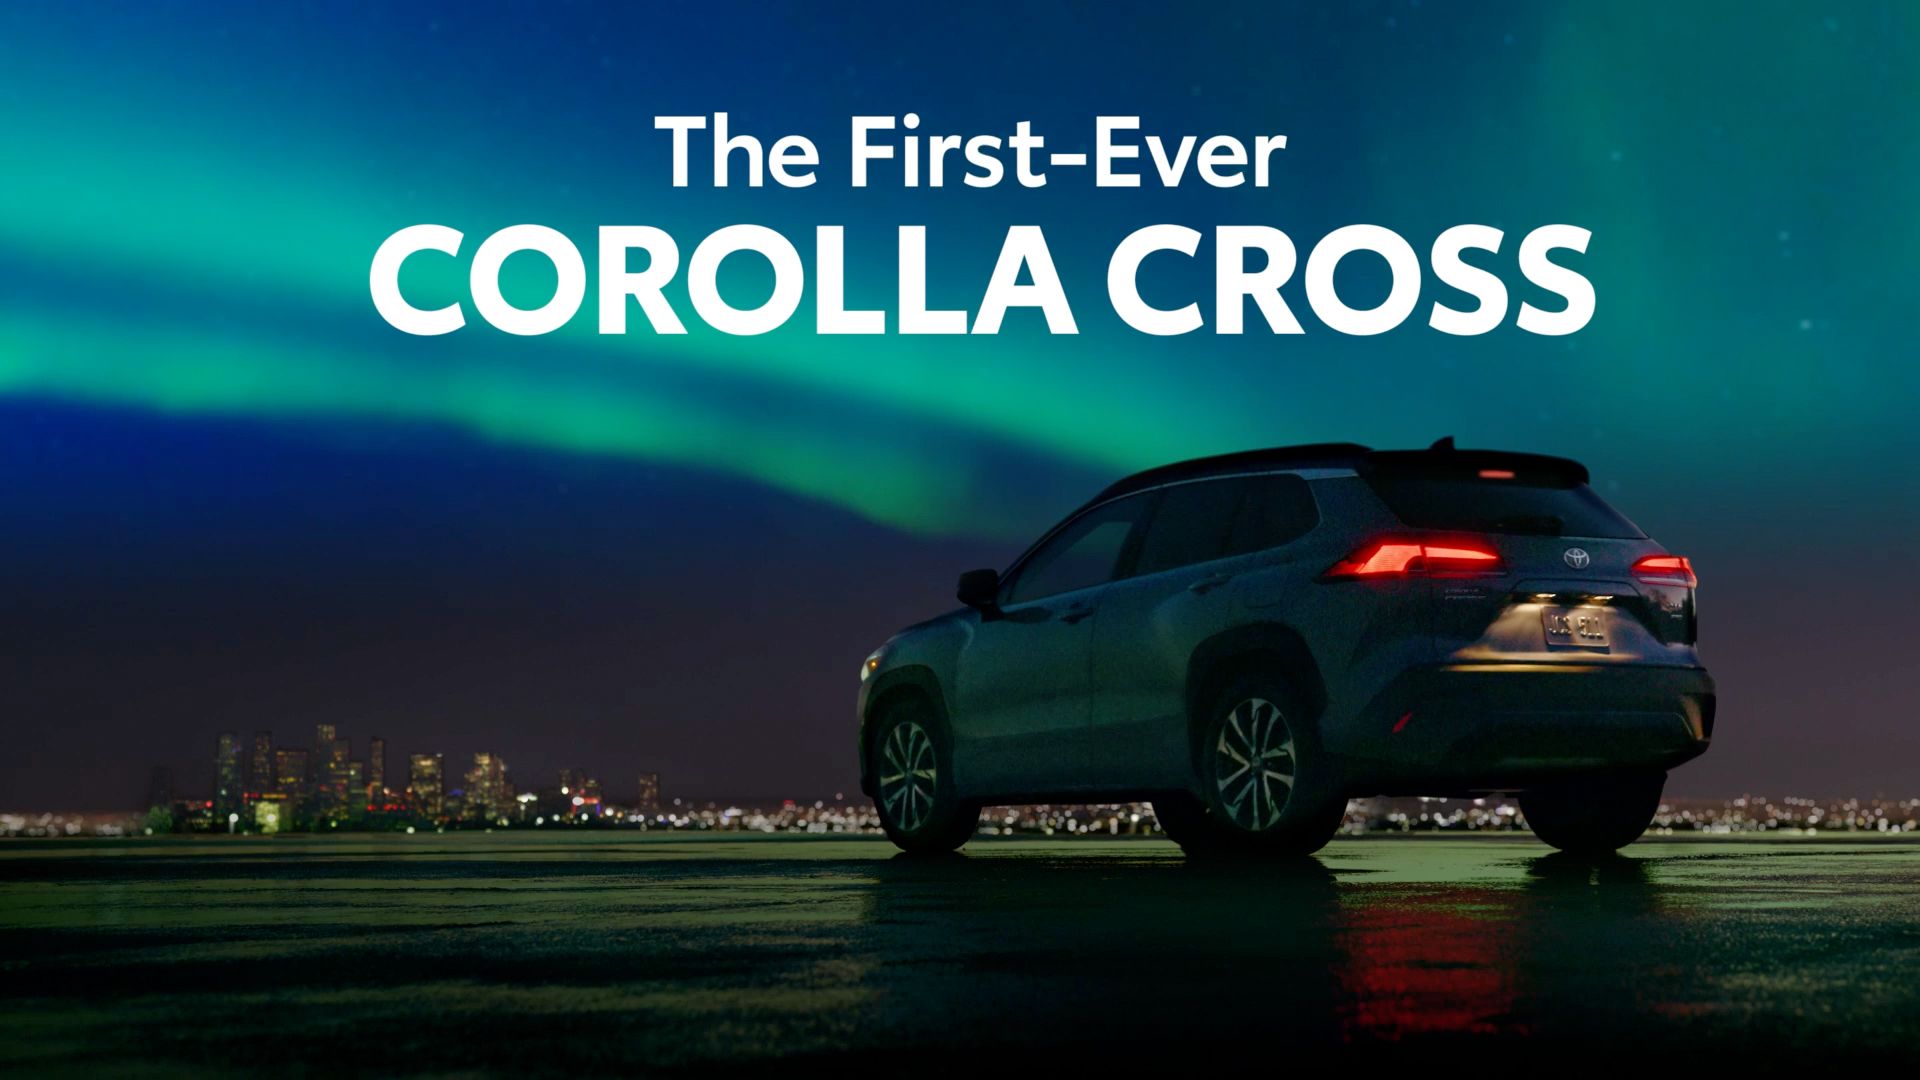 Ending of a campaign spot with text super "The First-Ever Corolla Cross.”